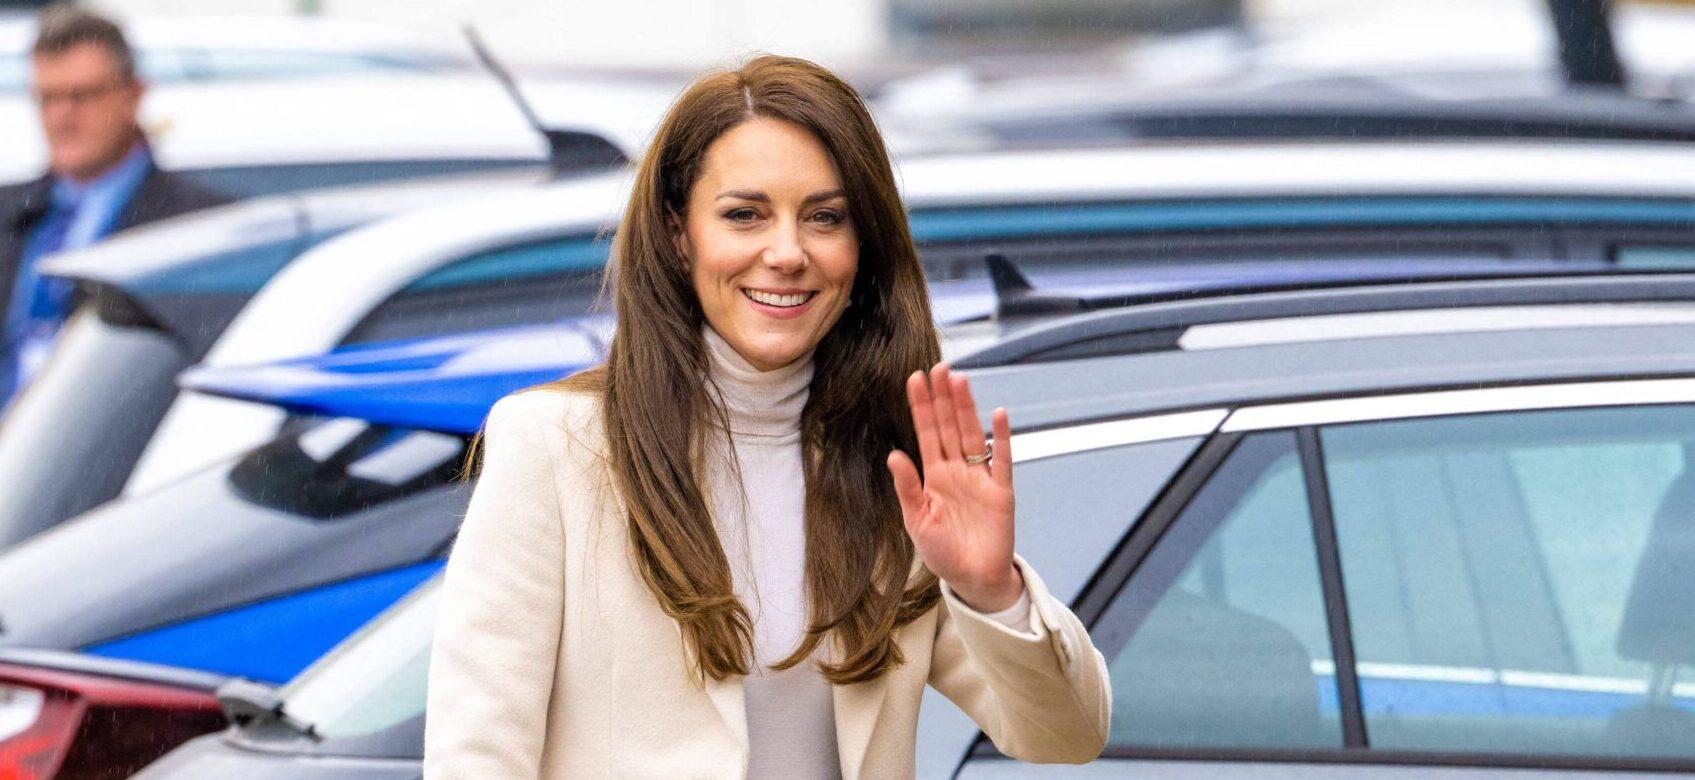 Kate Middleton’s Name Cleared From Trooping The Colour Attendees List